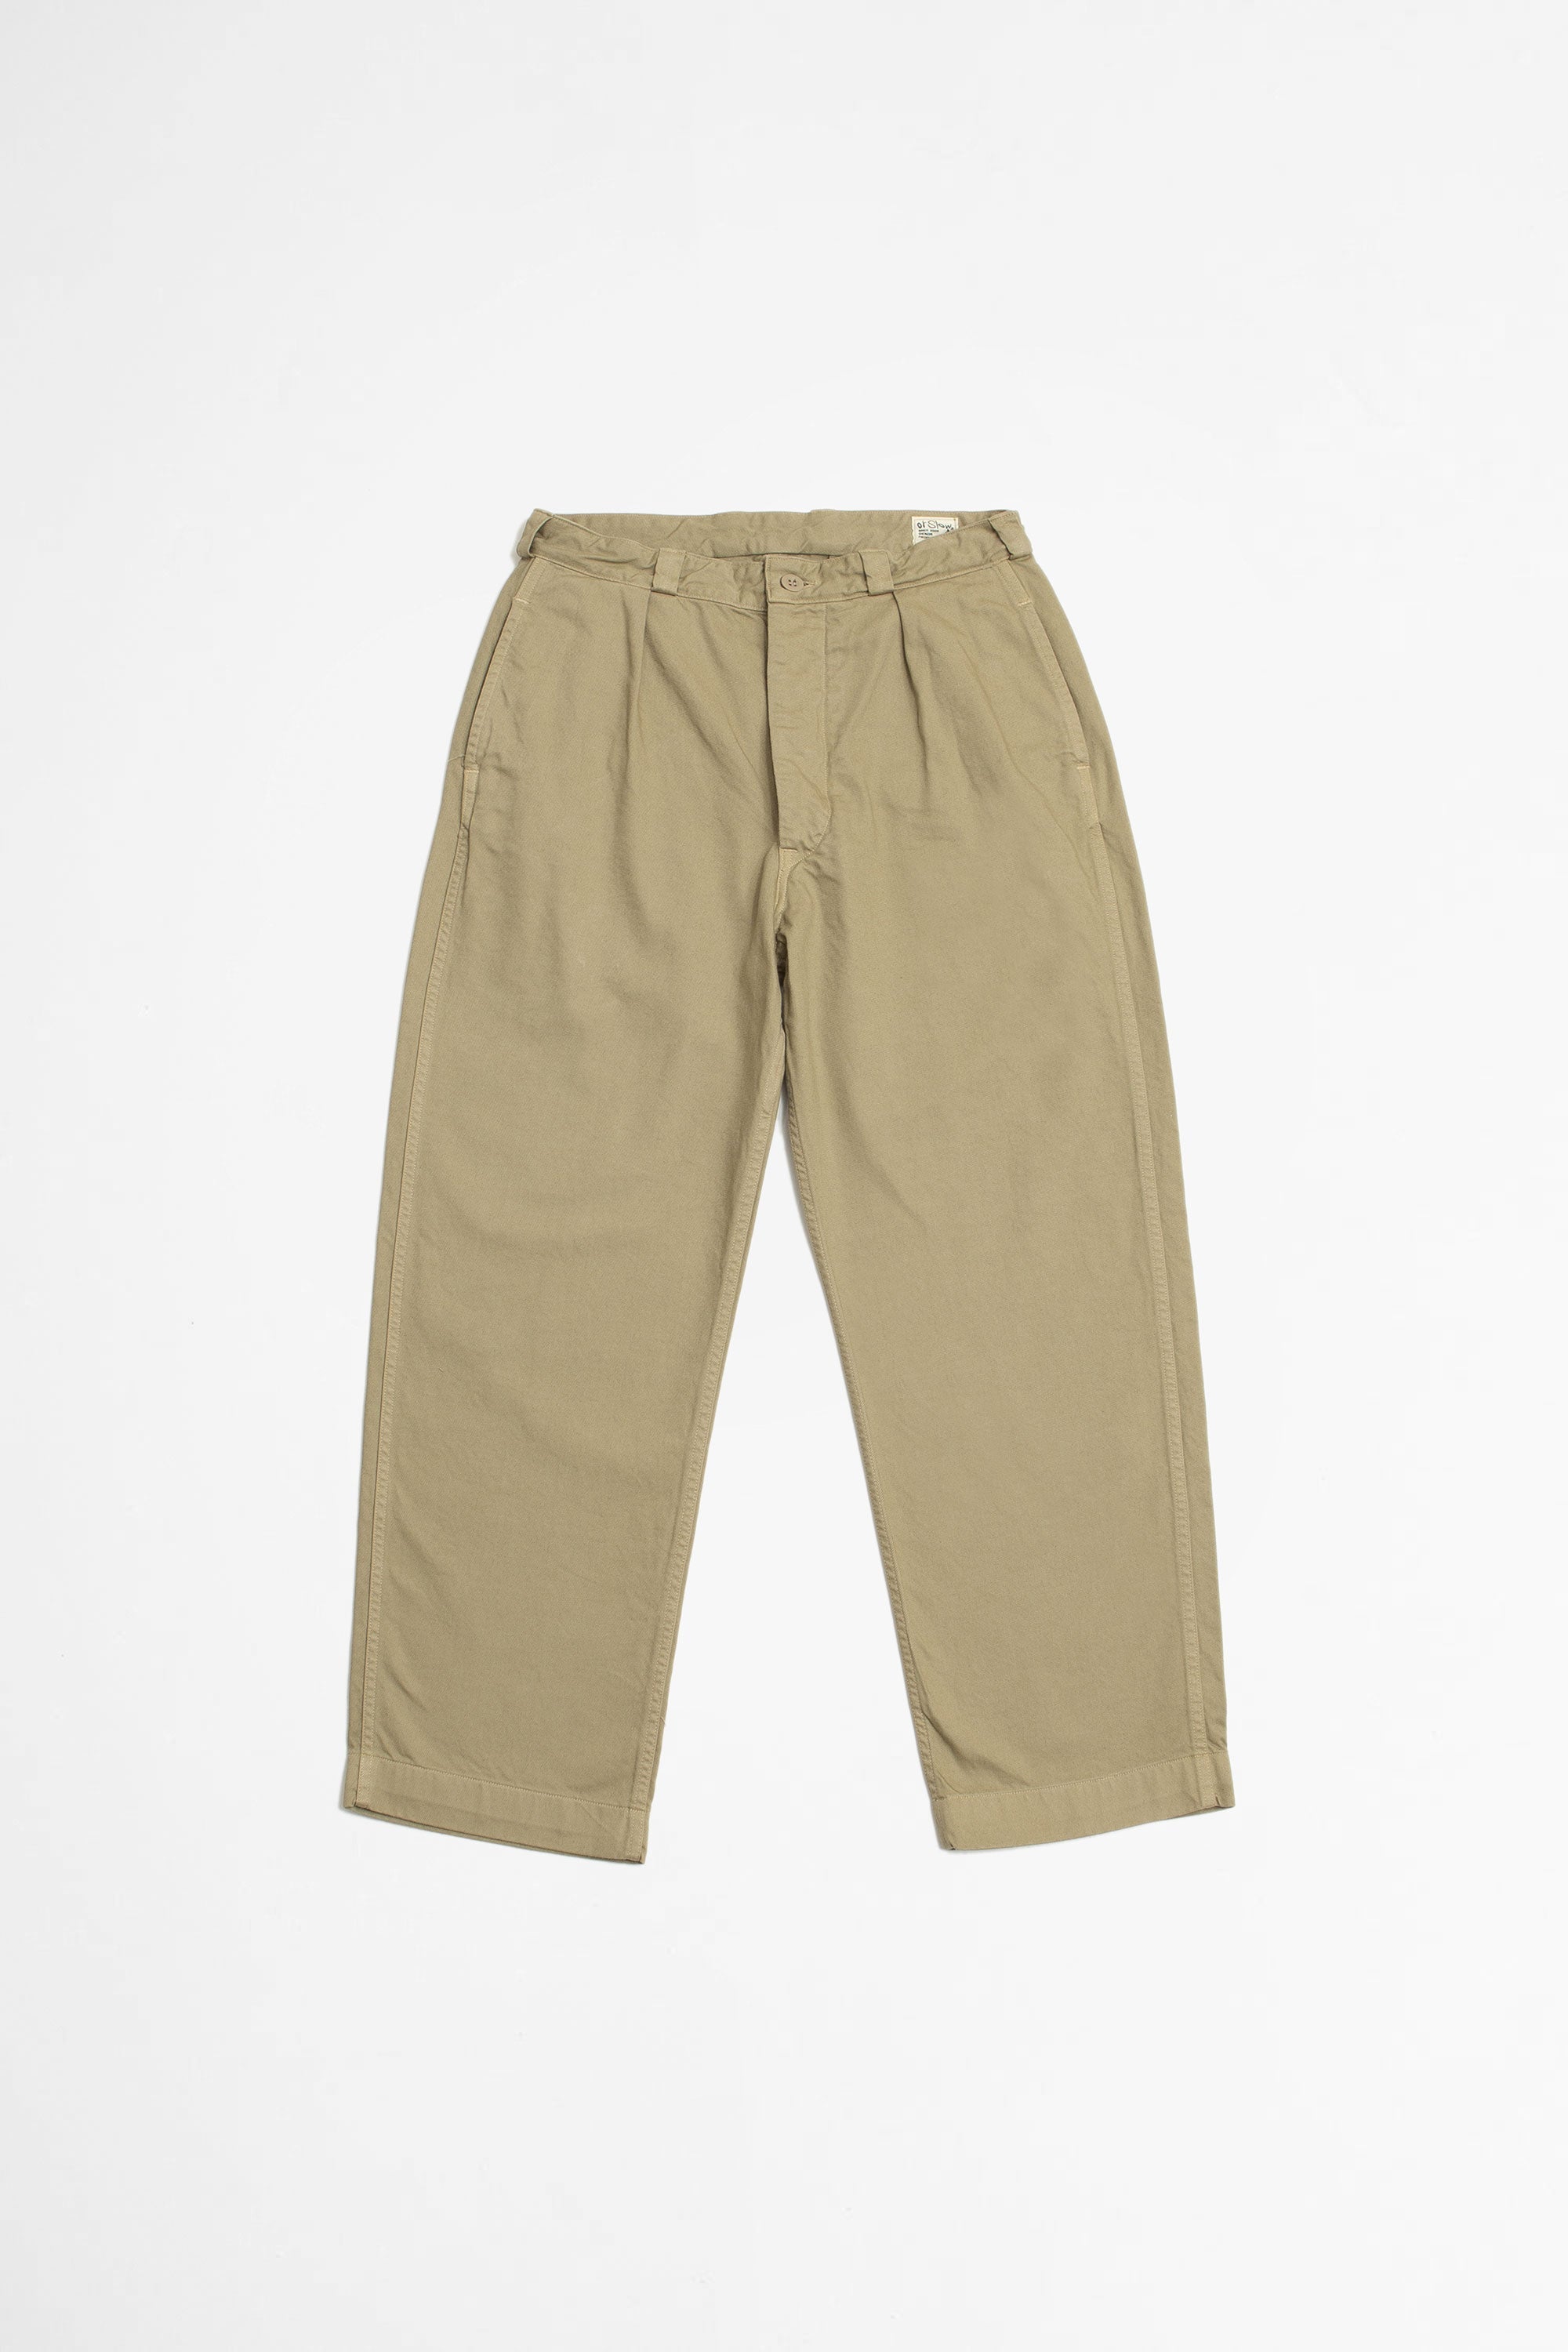 SPORTIVO [M-52 french army pants sand beige]